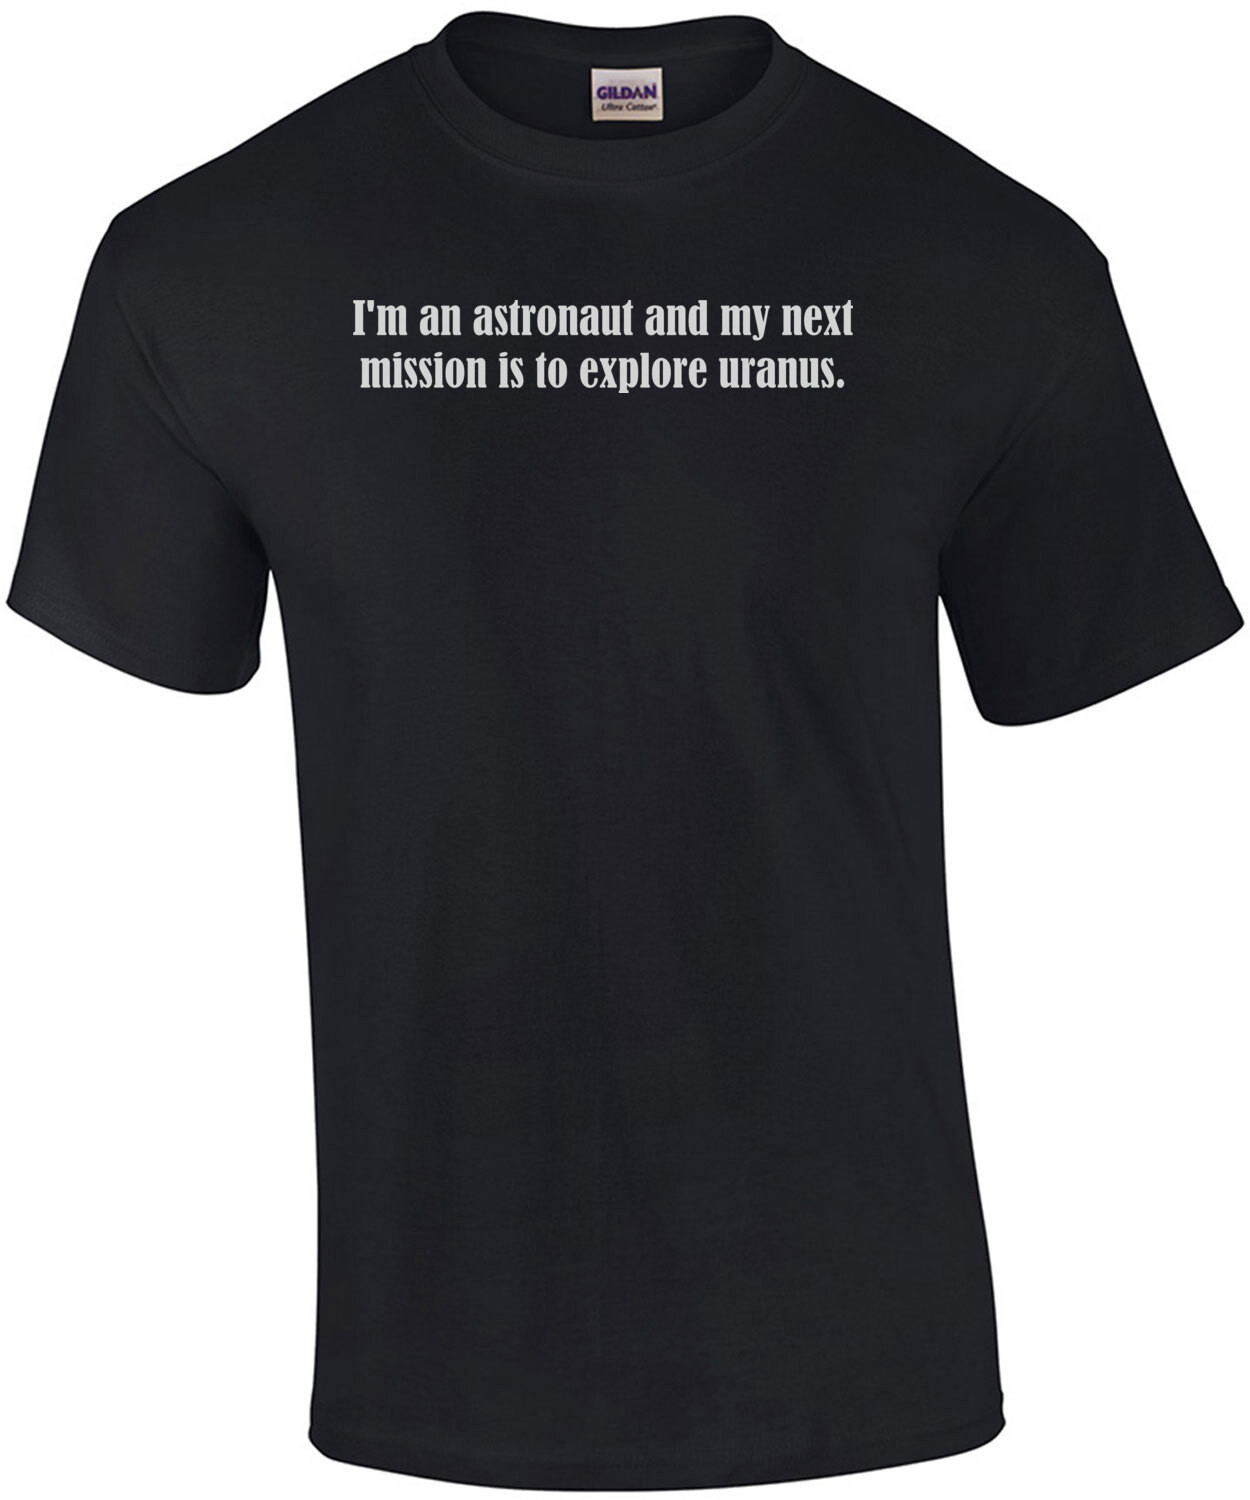 I'm an astronaut and my next mission is to explore uranus - funny sexual offensive t-shirt